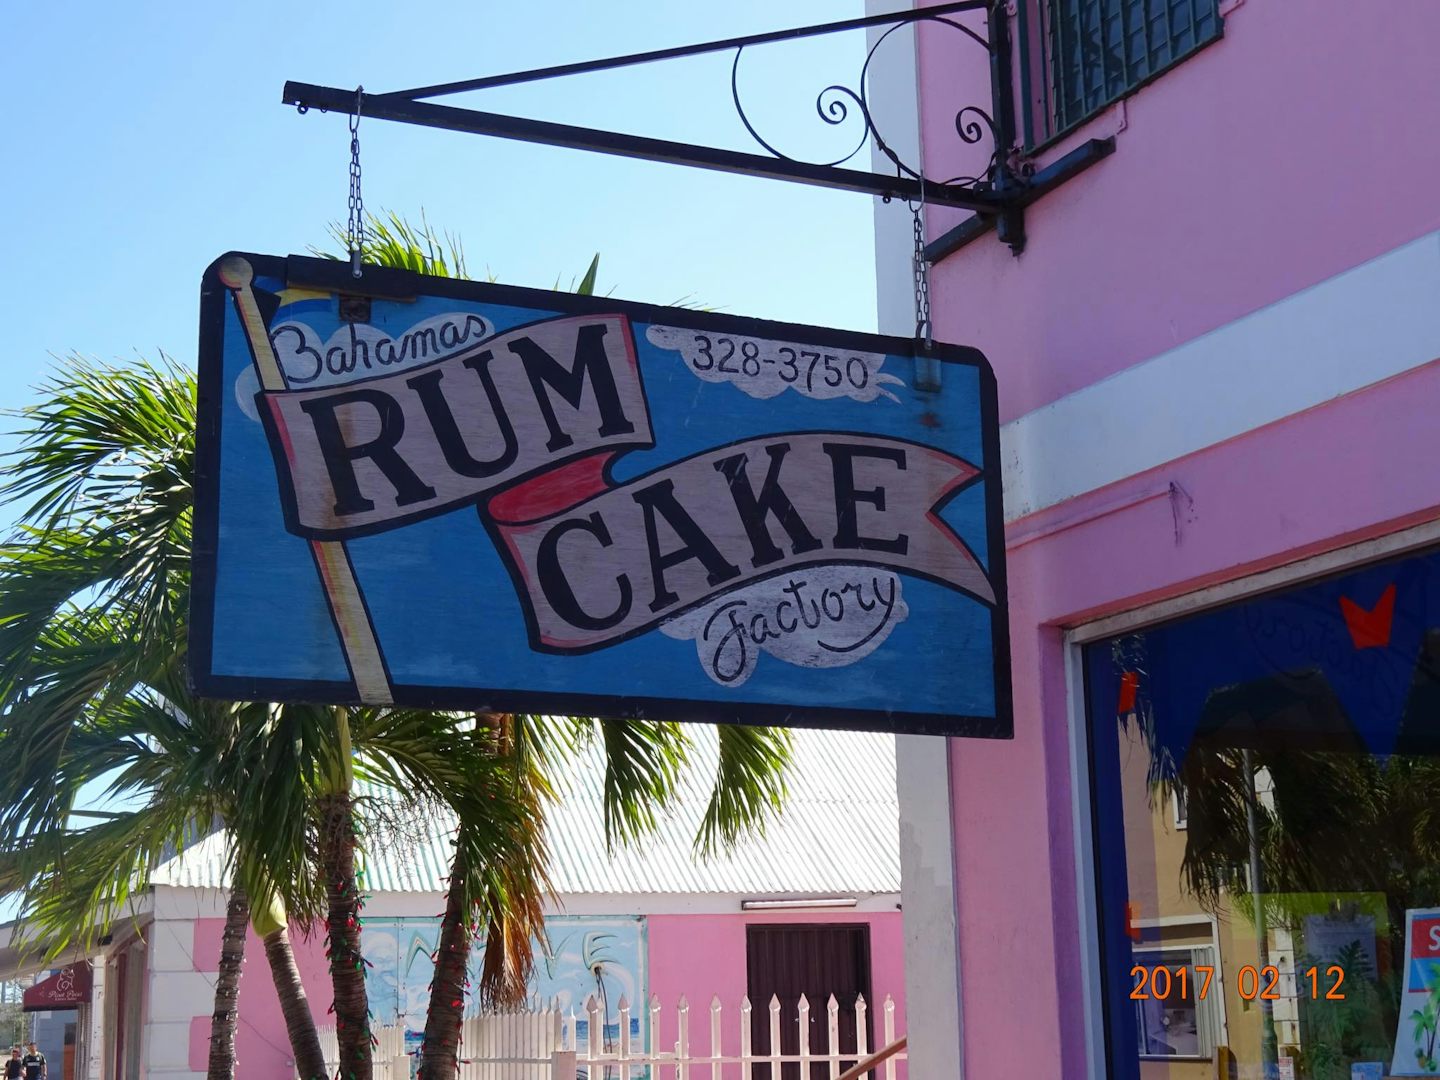 Be ready to sample lots of rum cake.